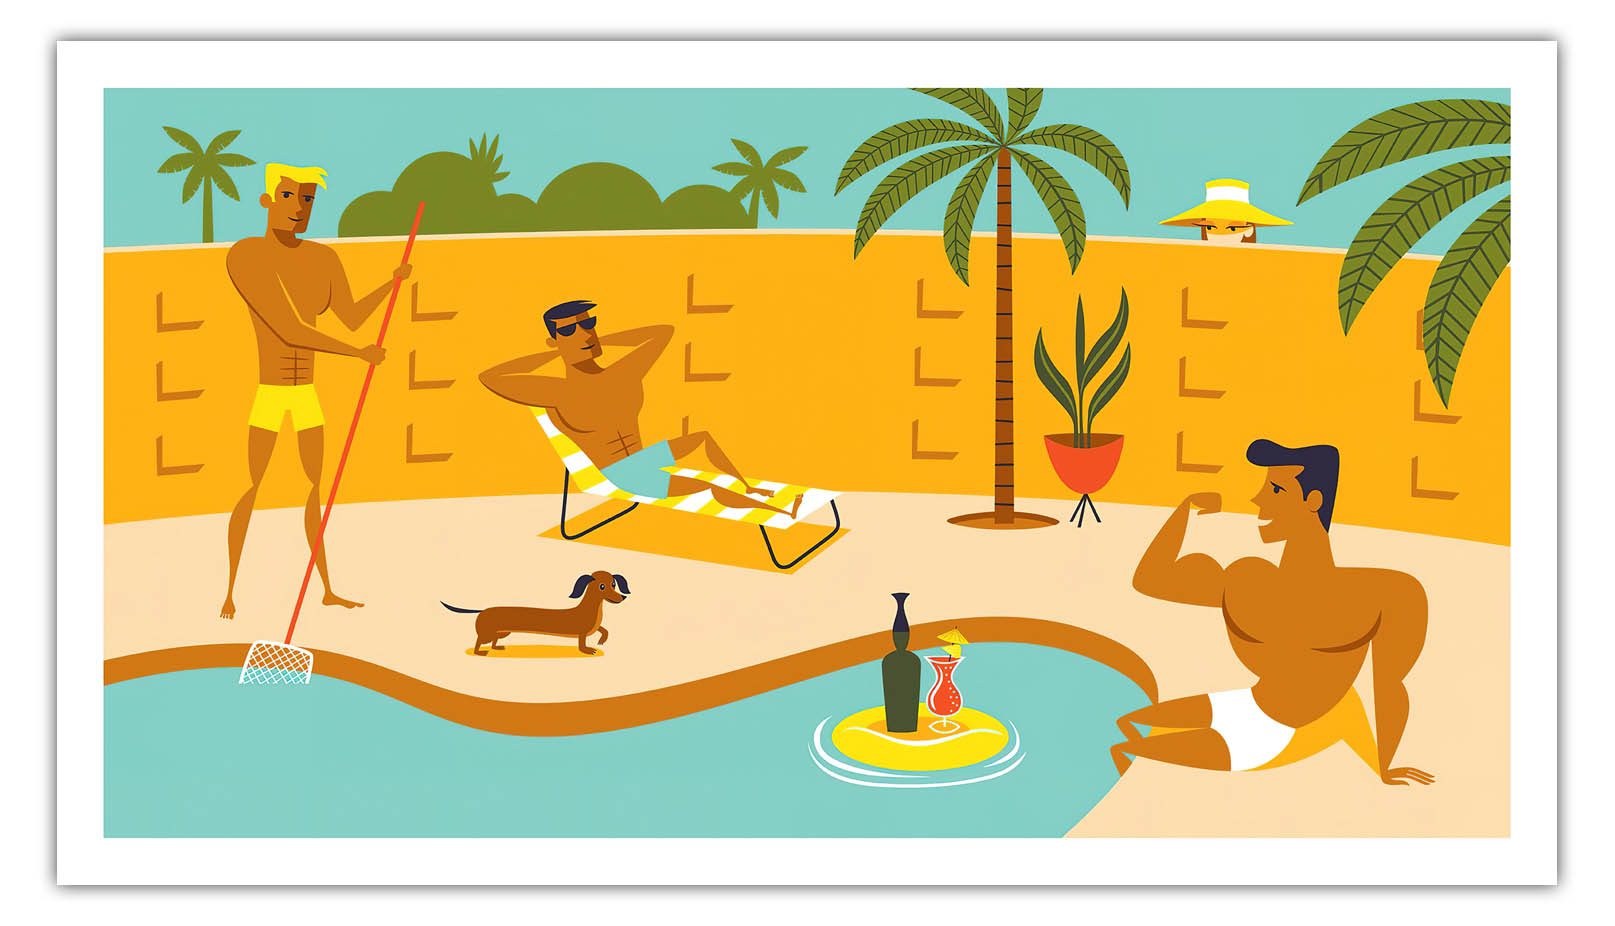 Muscle Pool Party by Shag (Josh Agle)